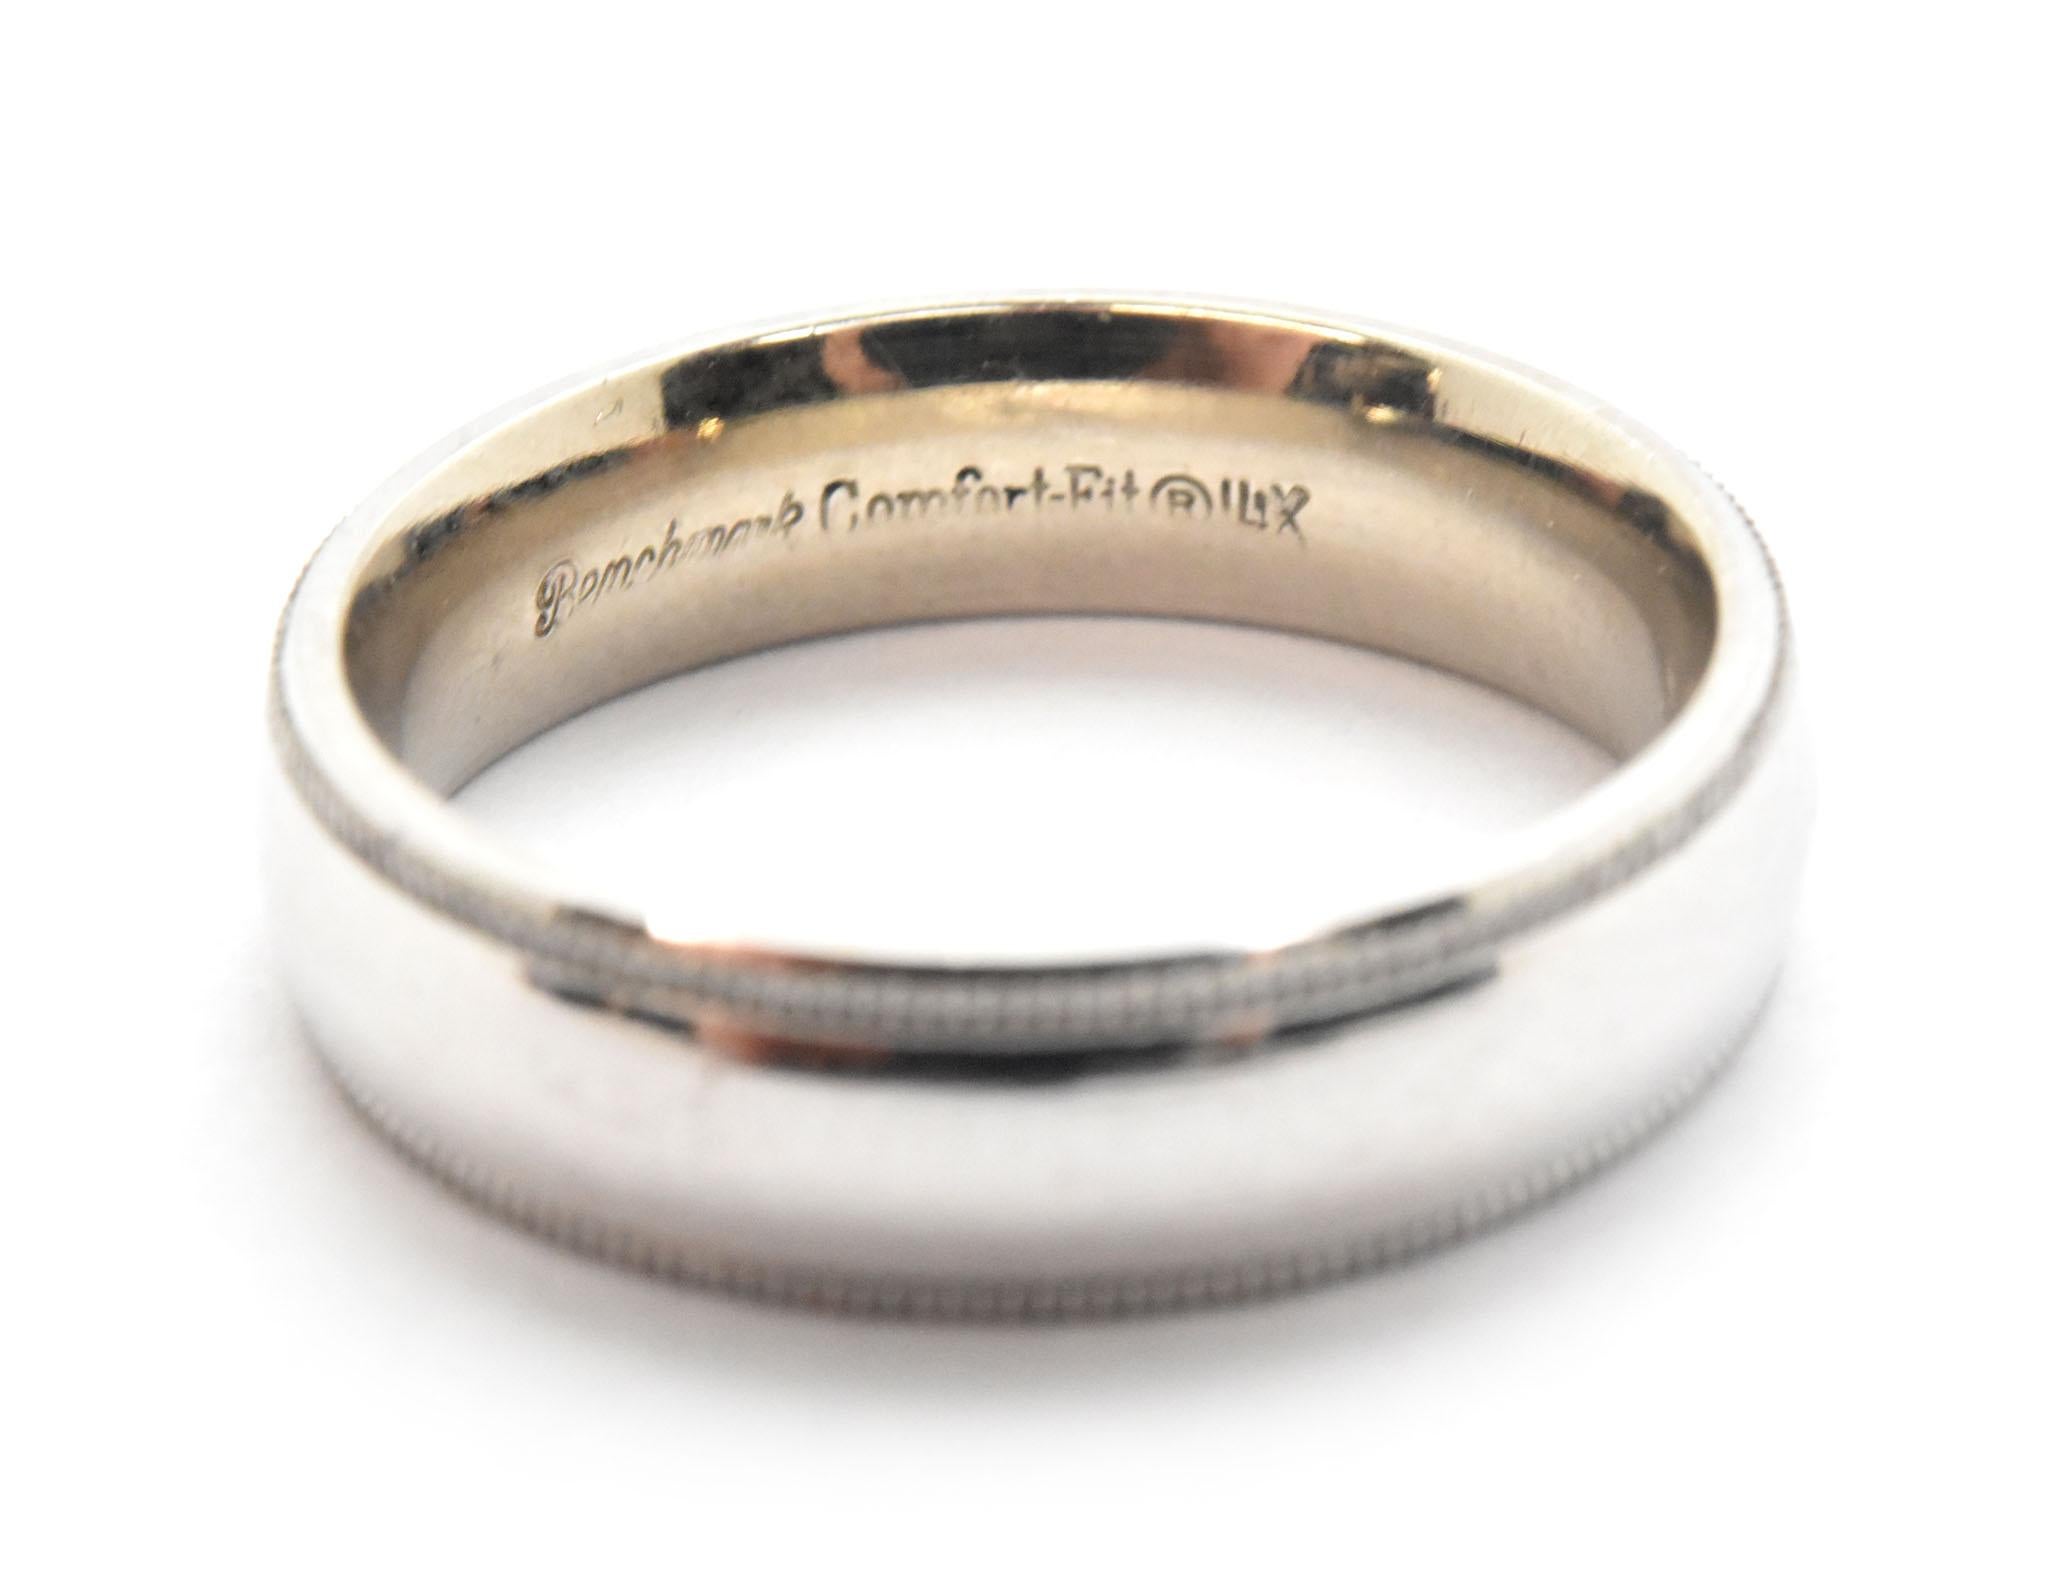 This classic band is crafted in 14k white gold with a high polished finish. Band on this ring is 5mm wide and 2mm thick. The size of the band is 6 and this ring weighs 5.55 grams.